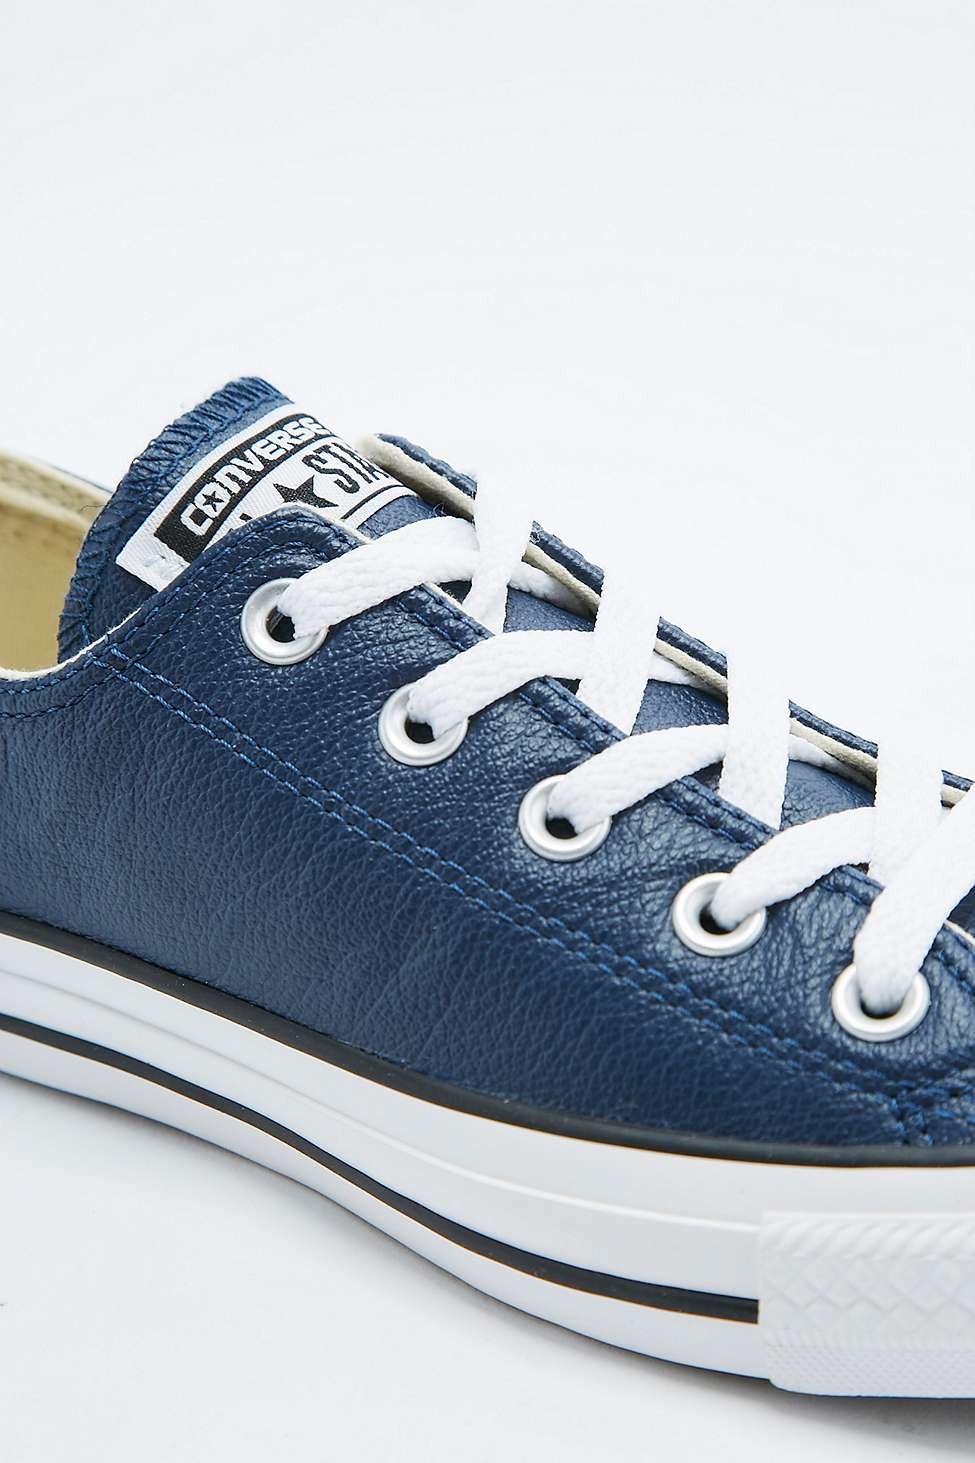 Shop - navy blue leather converse - OFF 